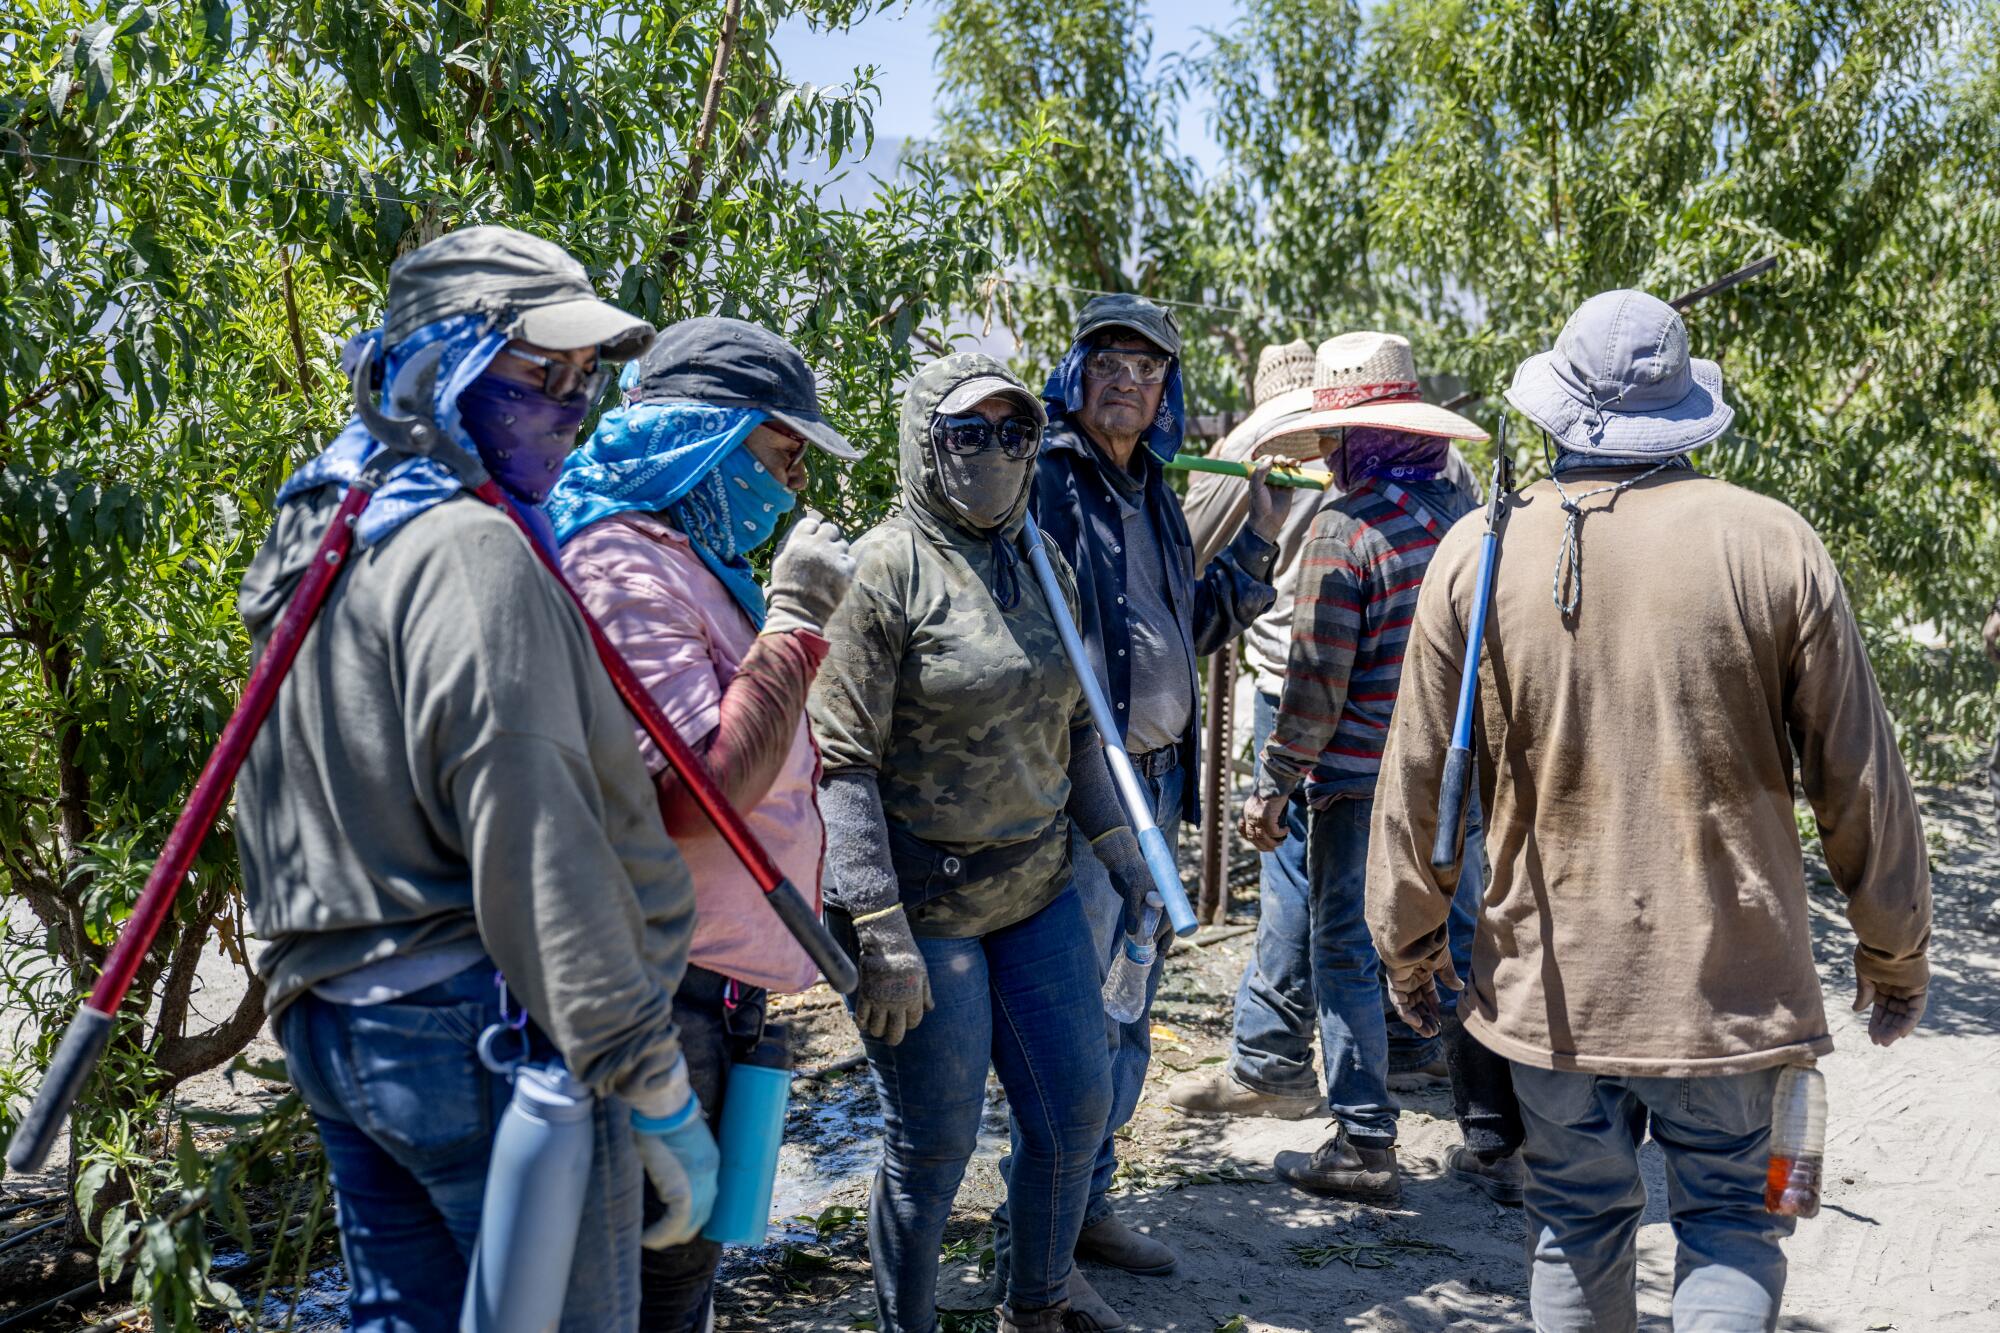 With the temperature well over 100 degrees, farmworkers stand among trees in partial shade